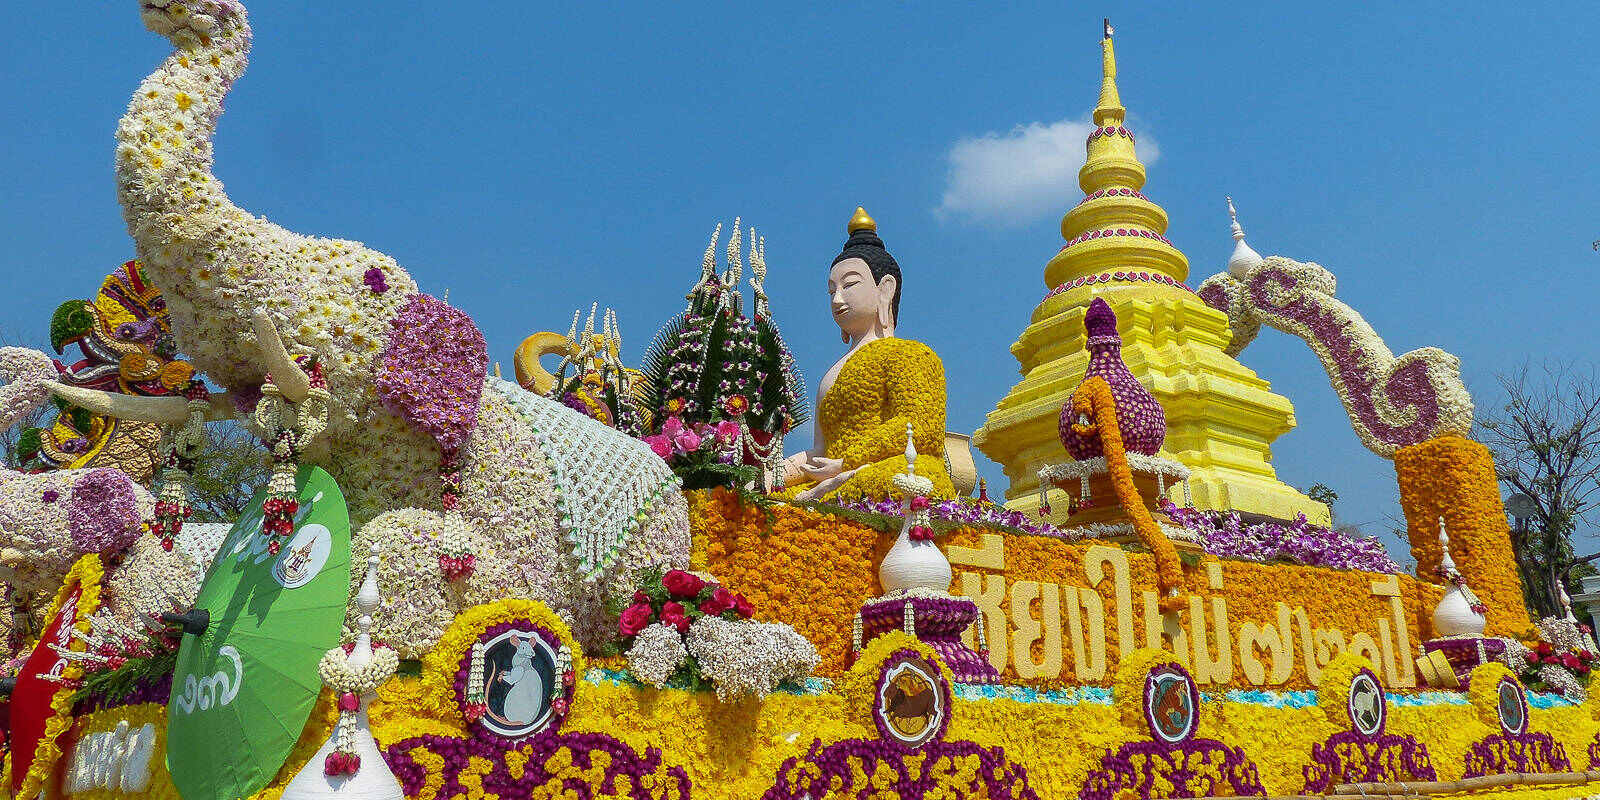 Chiang Mai Flower Festival: Is It Worth to Visit? - Travelers and